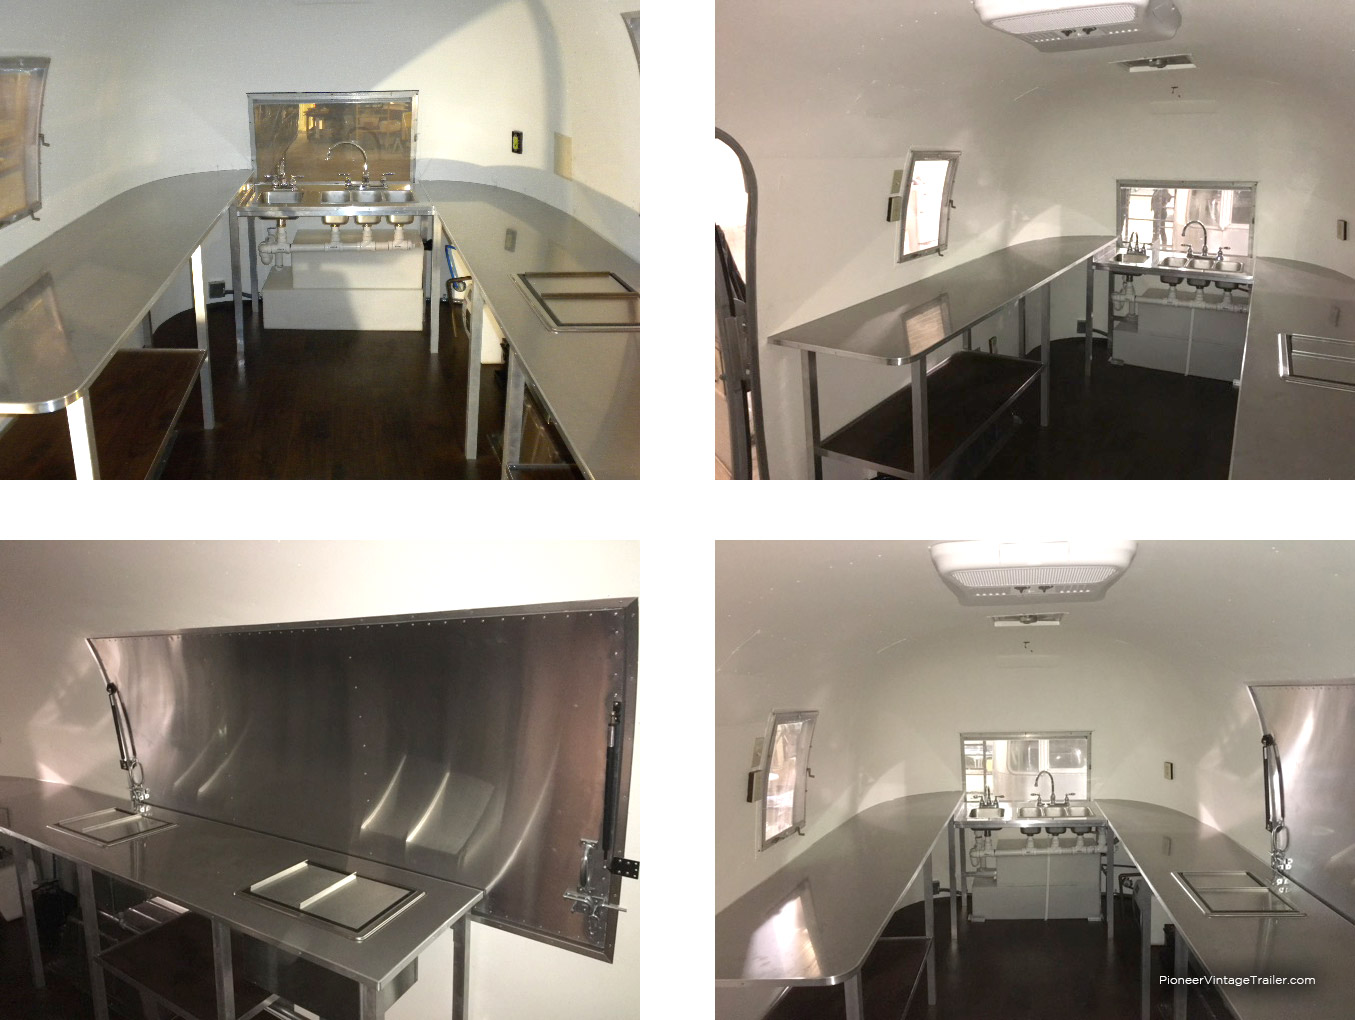 1966 Airstream Globetrotter - interior outfitted for food trailer